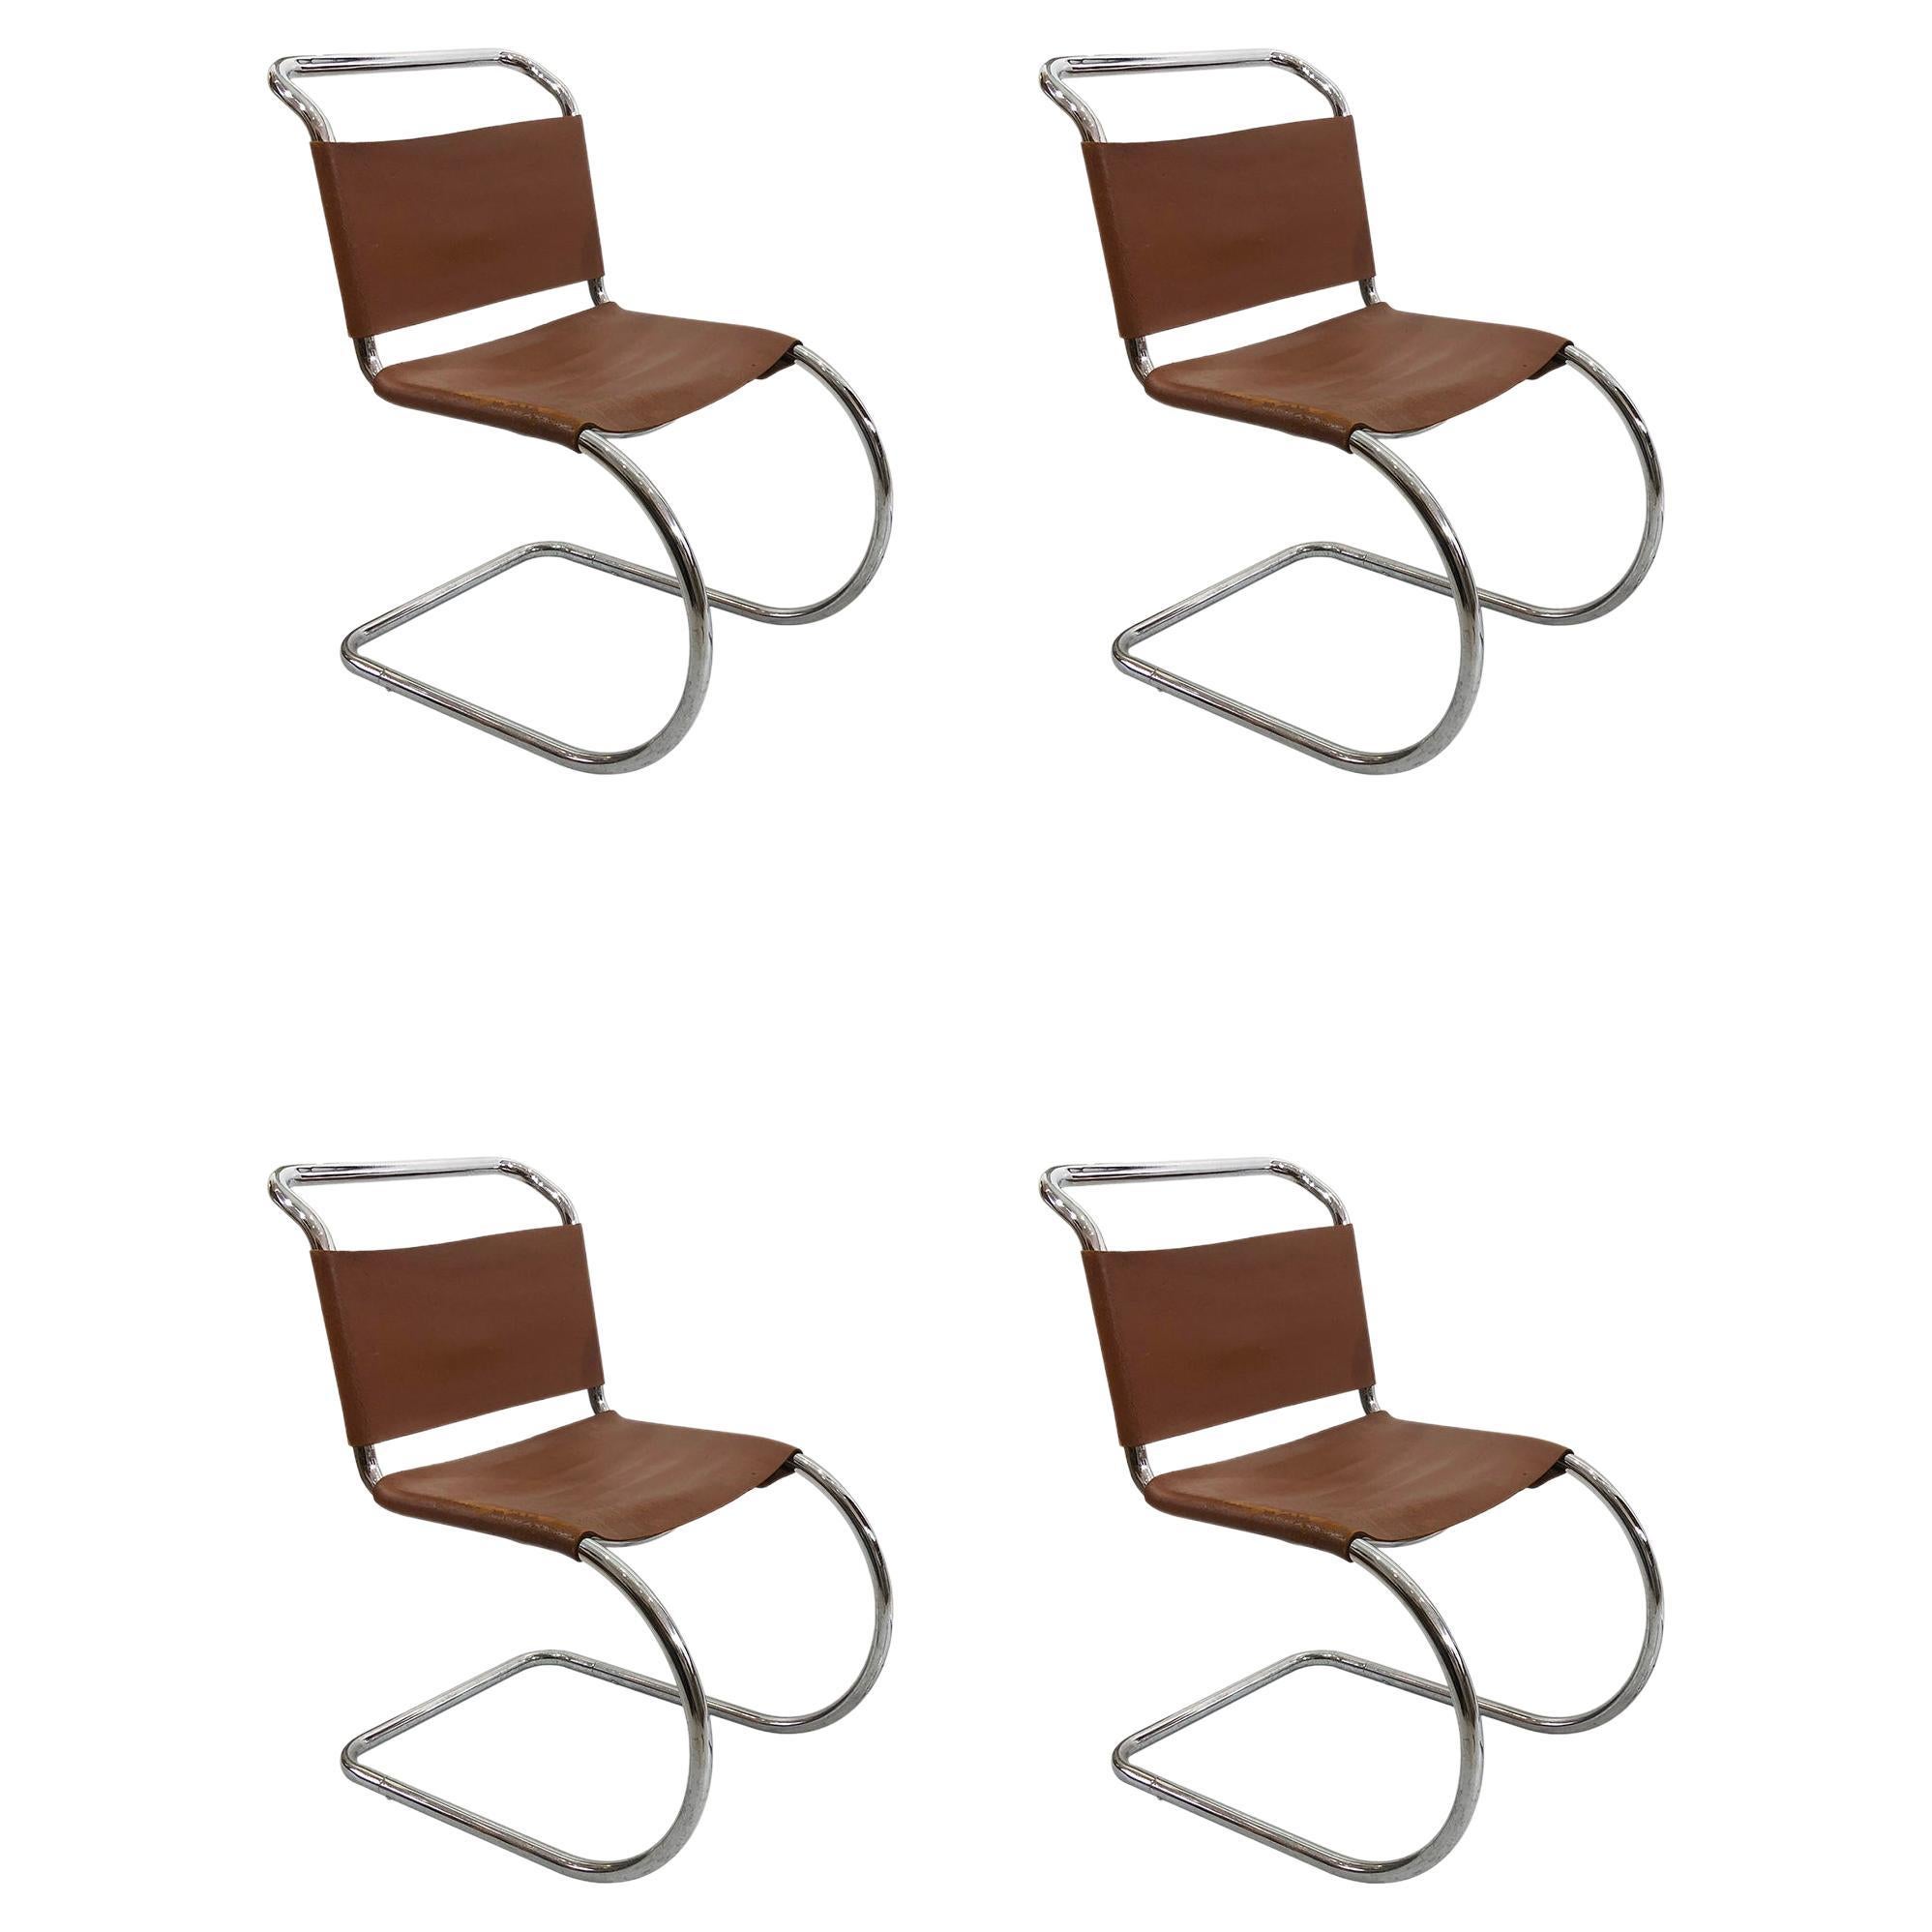 4 Ludwig Mies van der Rohe Mr10 Dining Chairs 1960s Knoll International  For Sale